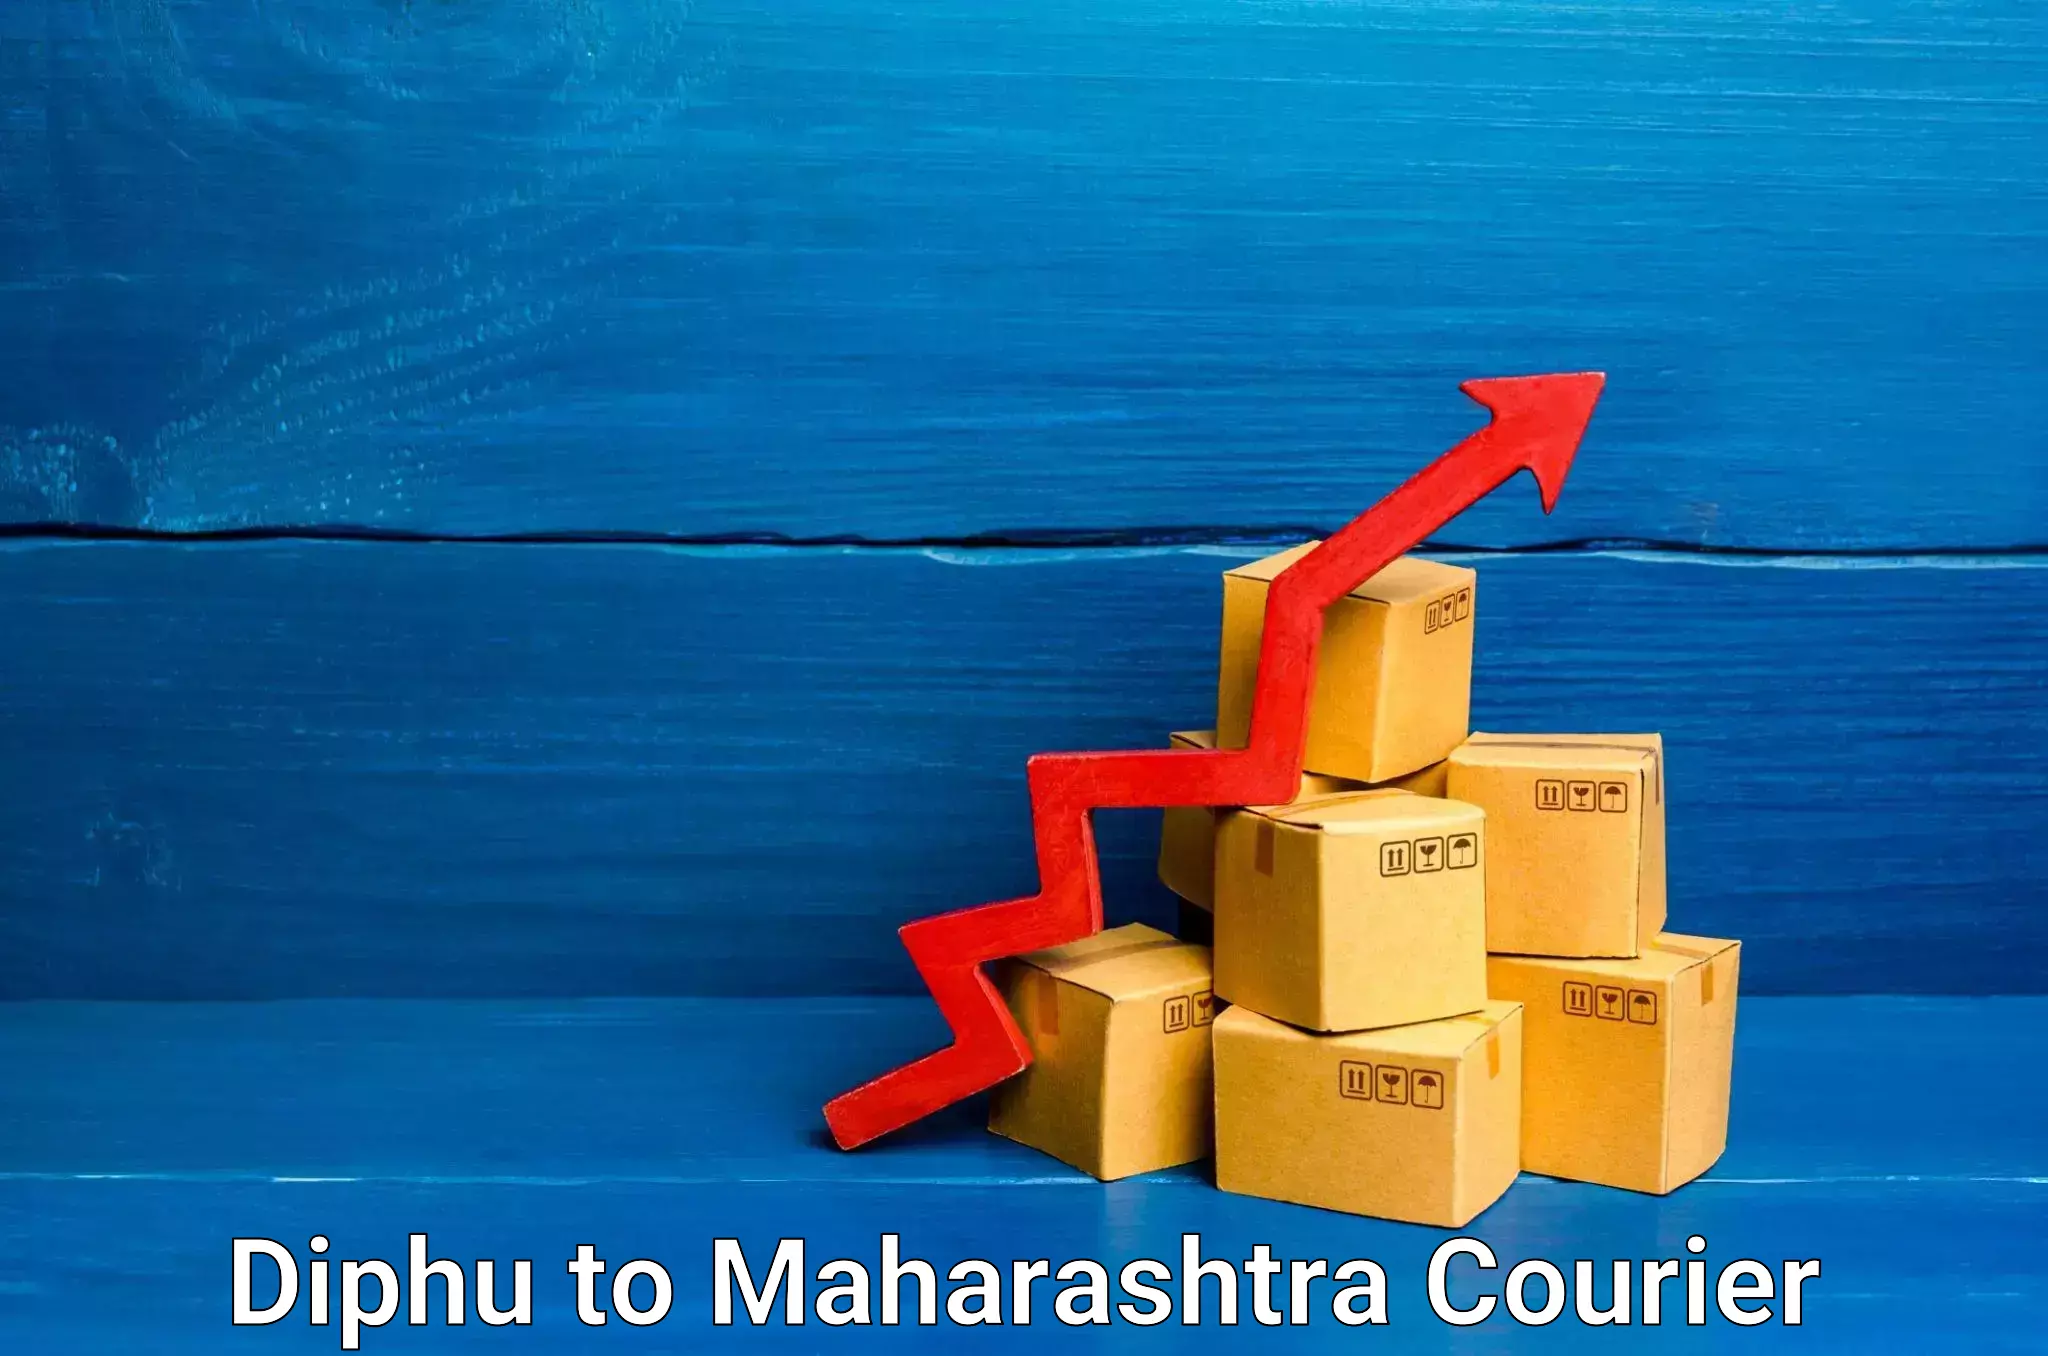 Package delivery network Diphu to Mumbai Port